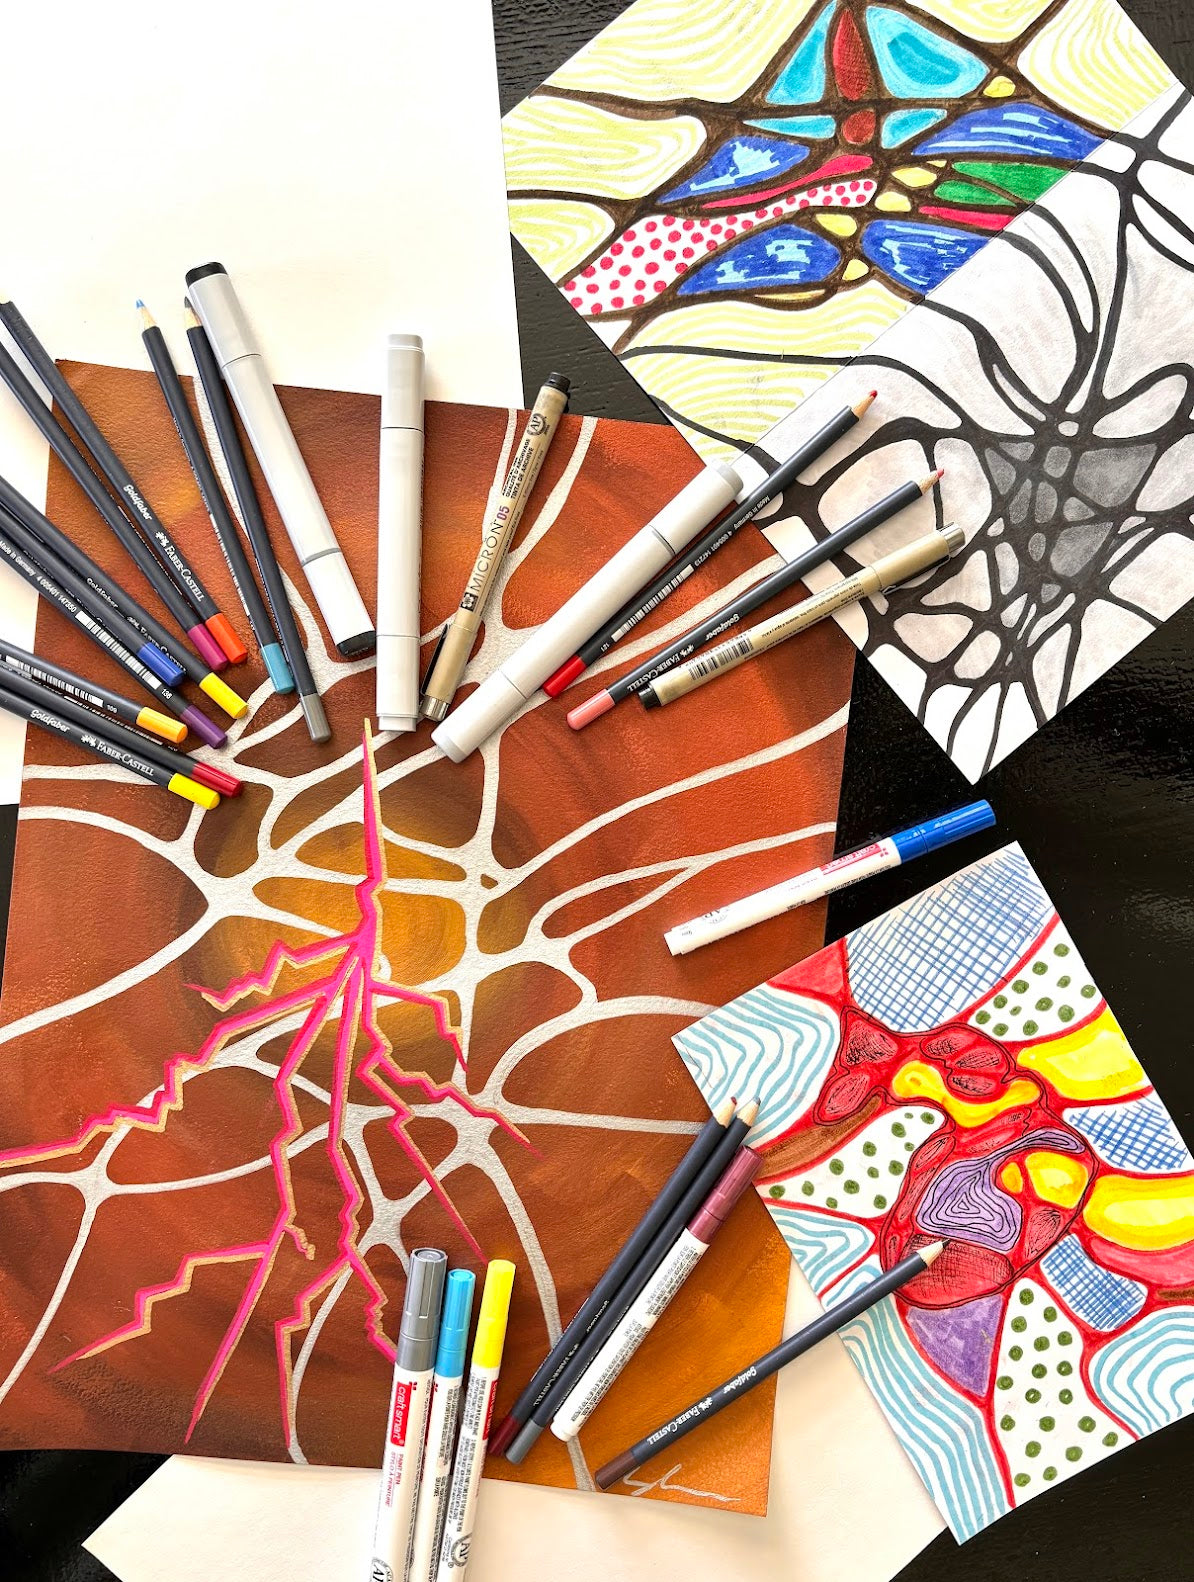 MAY 11th IN-PERSON - Introduction to Neurographic Art with Hannah Schaler